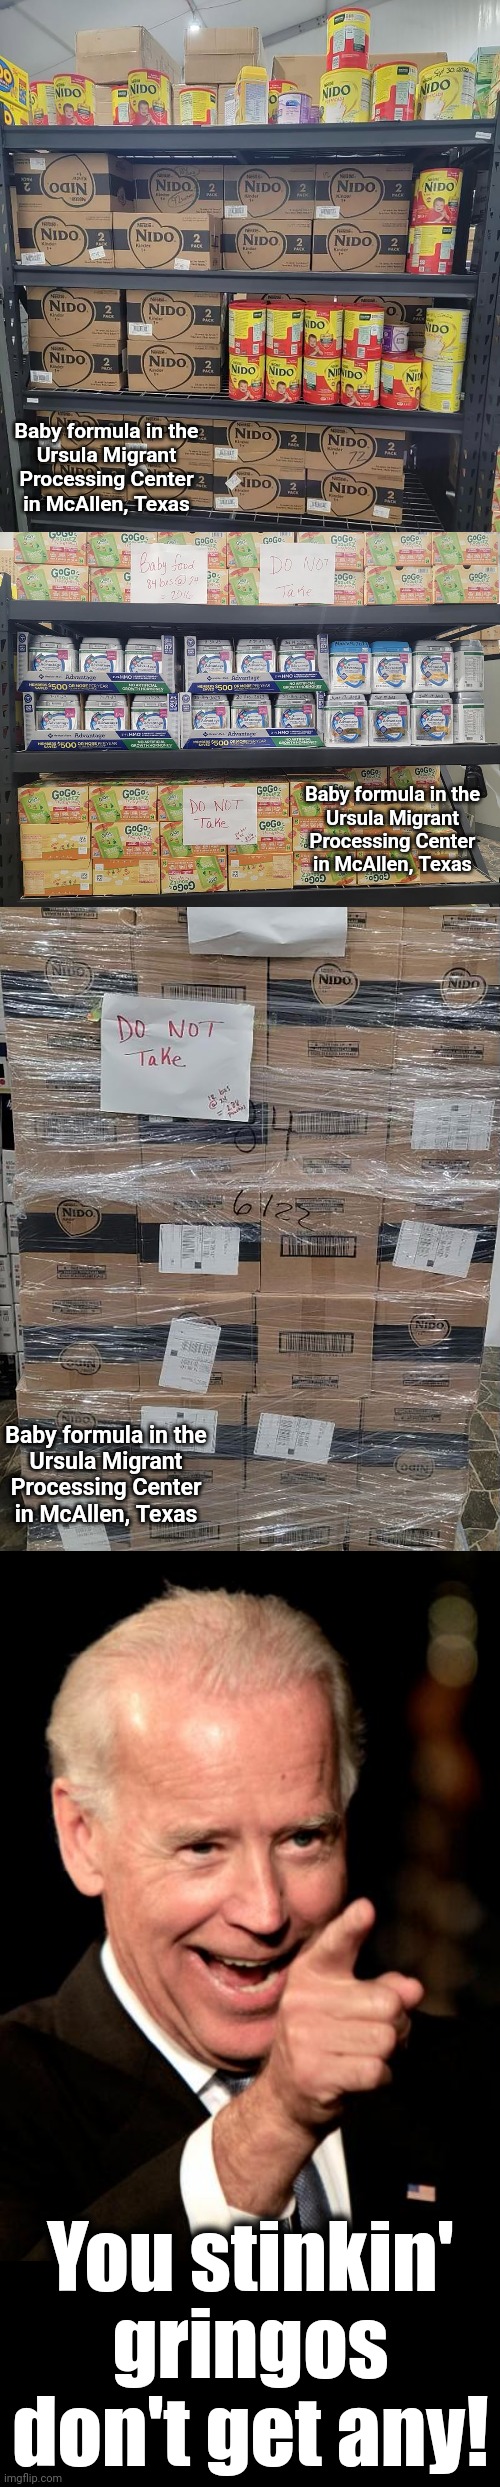 Fighting white privilege! | Baby formula in the
Ursula Migrant
Processing Center
in McAllen, Texas; Baby formula in the
Ursula Migrant
Processing Center
in McAllen, Texas; Baby formula in the
Ursula Migrant
Processing Center
in McAllen, Texas; You stinkin' gringos
don't get any! | image tagged in memes,smilin biden,baby formula,joe biden,democrats,white privilege | made w/ Imgflip meme maker